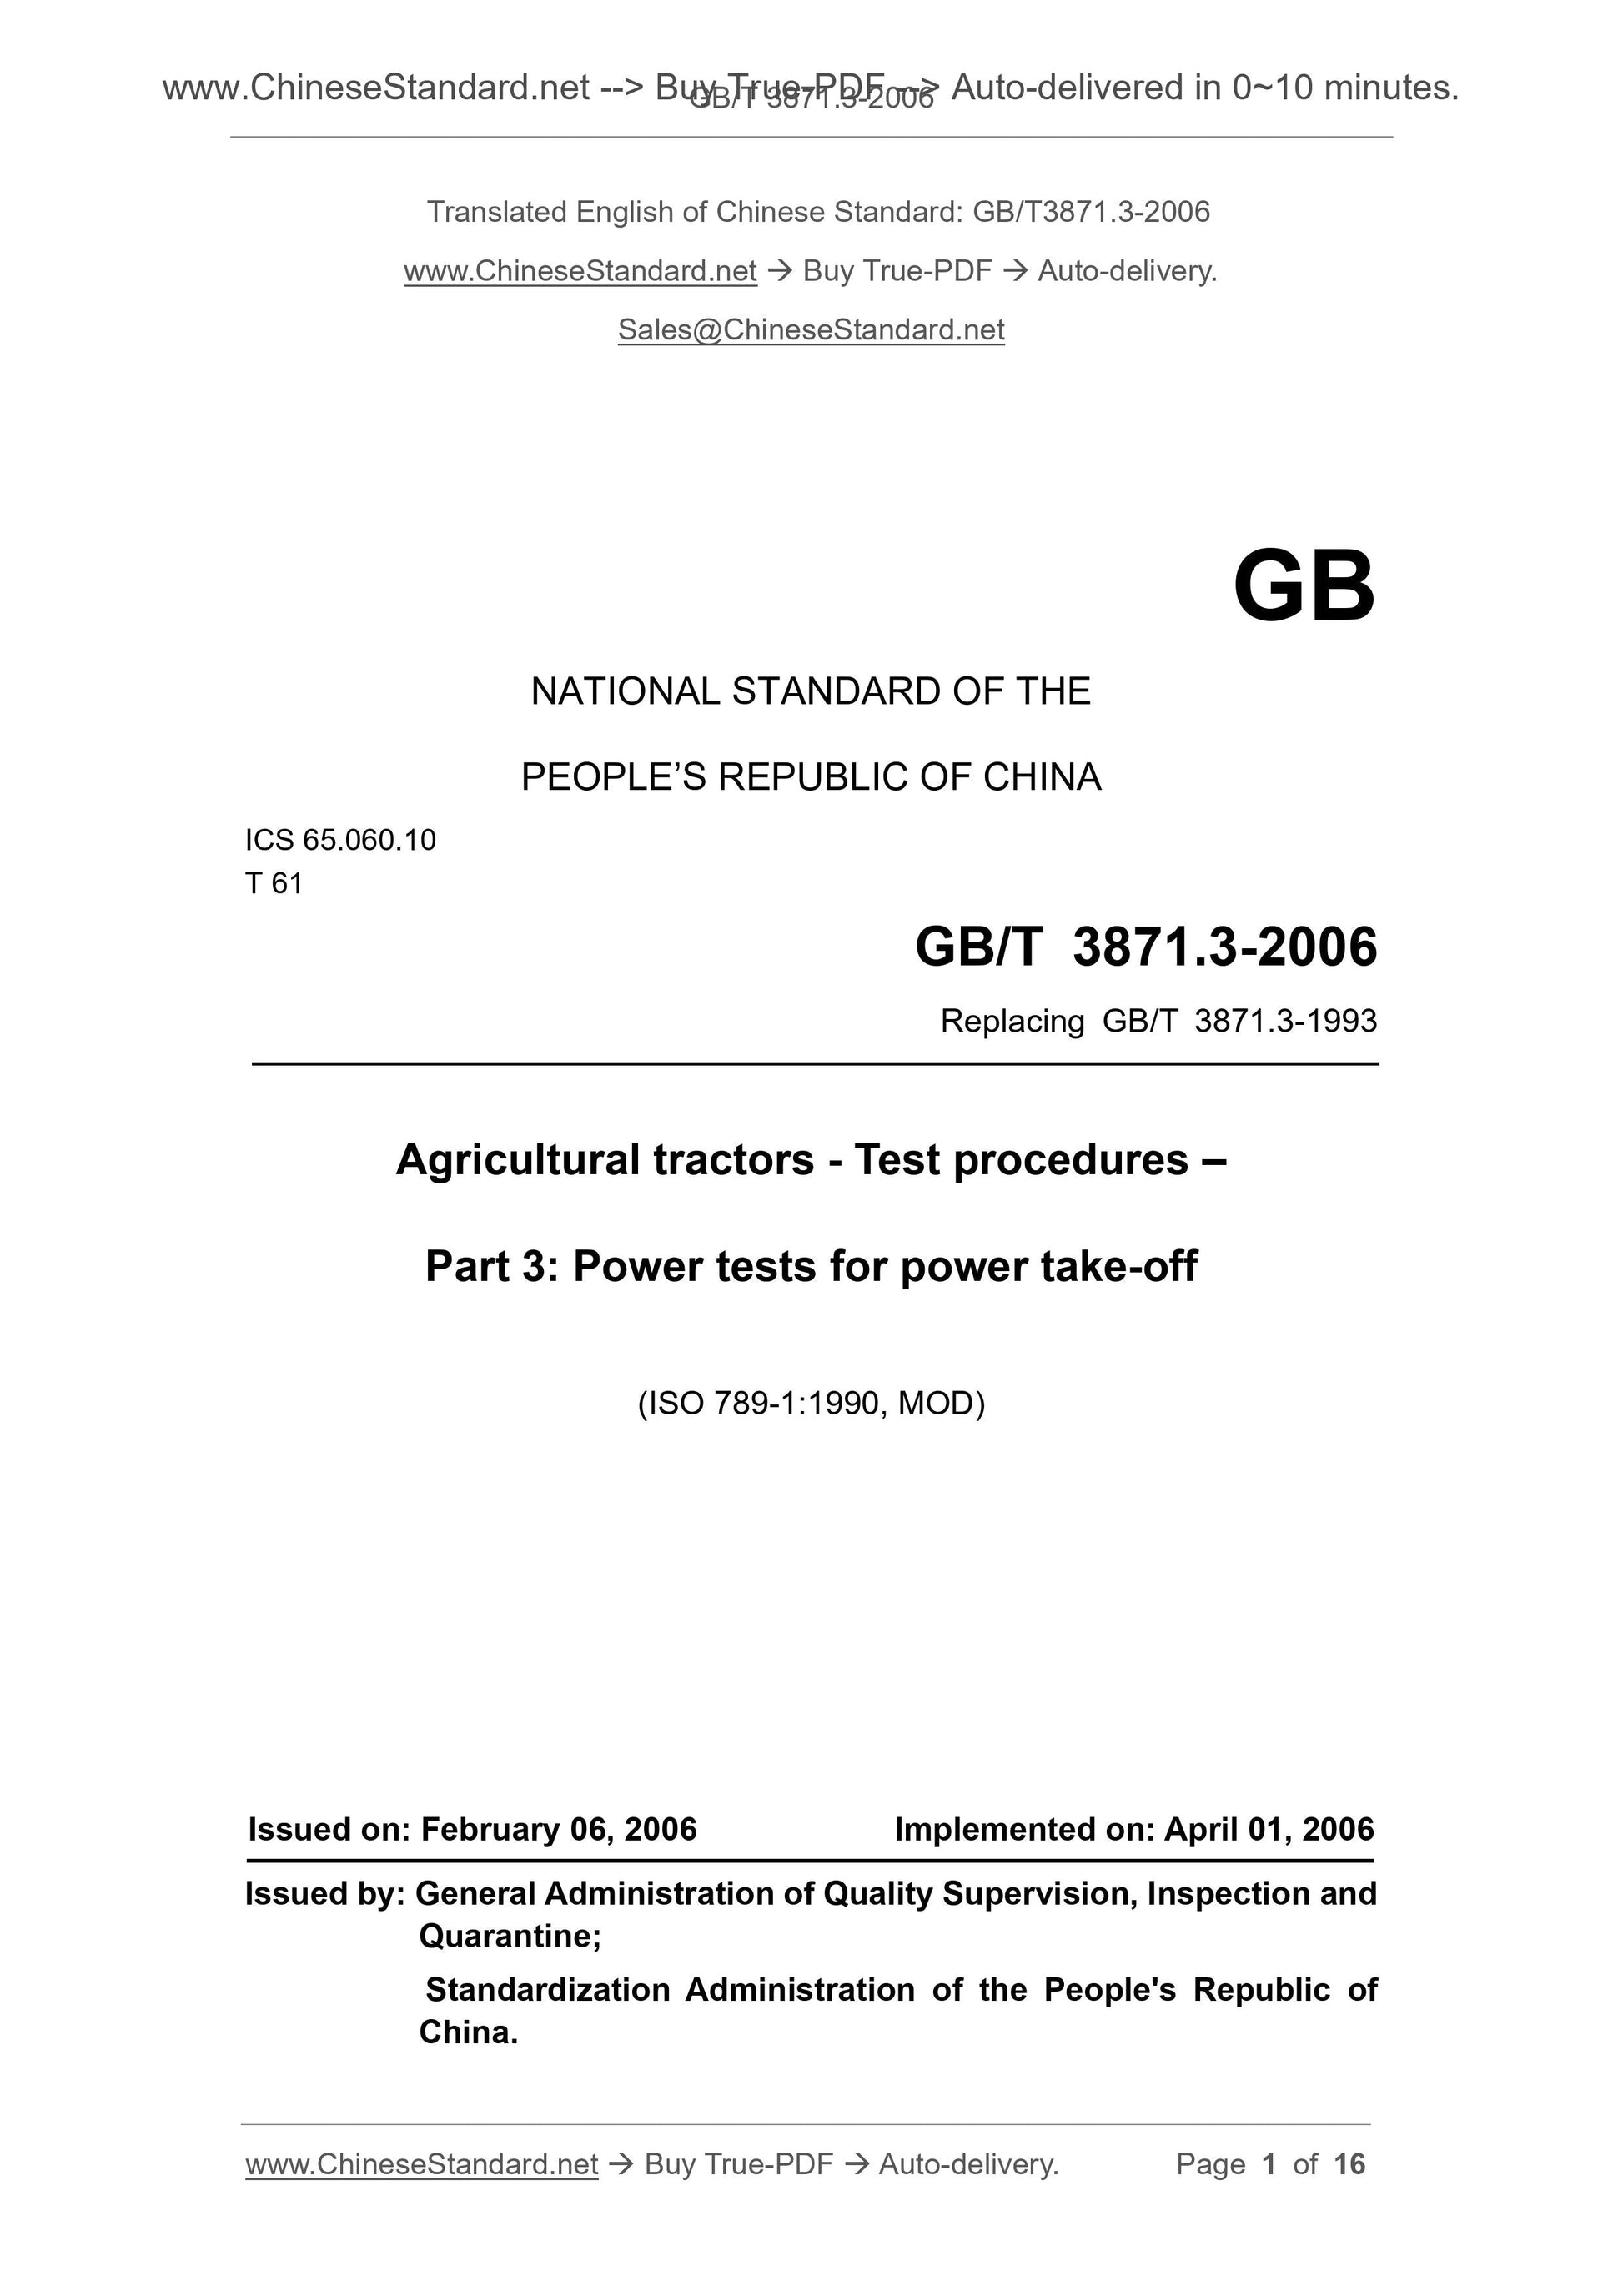 GB/T 3871.3-2006 Page 1